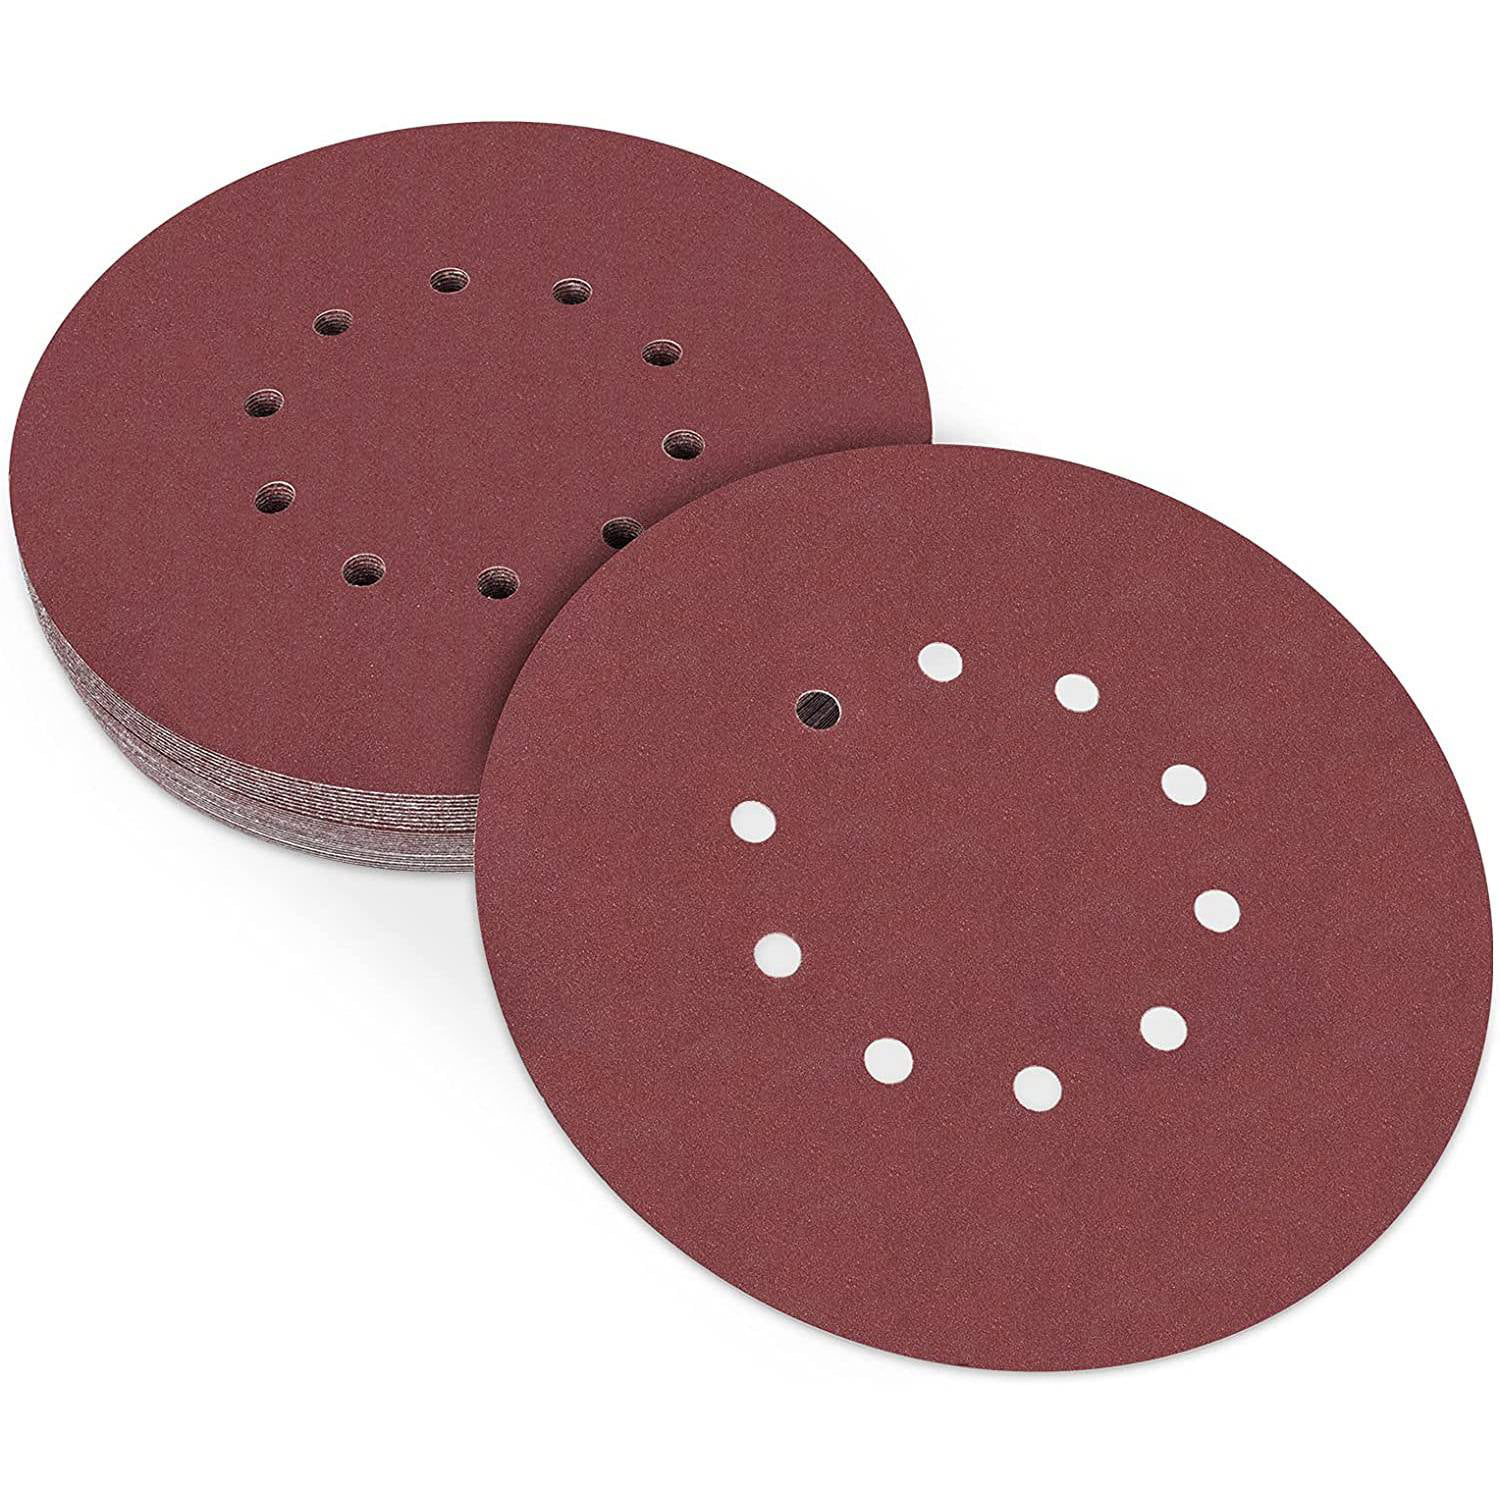 Pack of 25 NEW 225mm Sanding Disc Pads Grit P120-25 for £8 or 100 for £22 